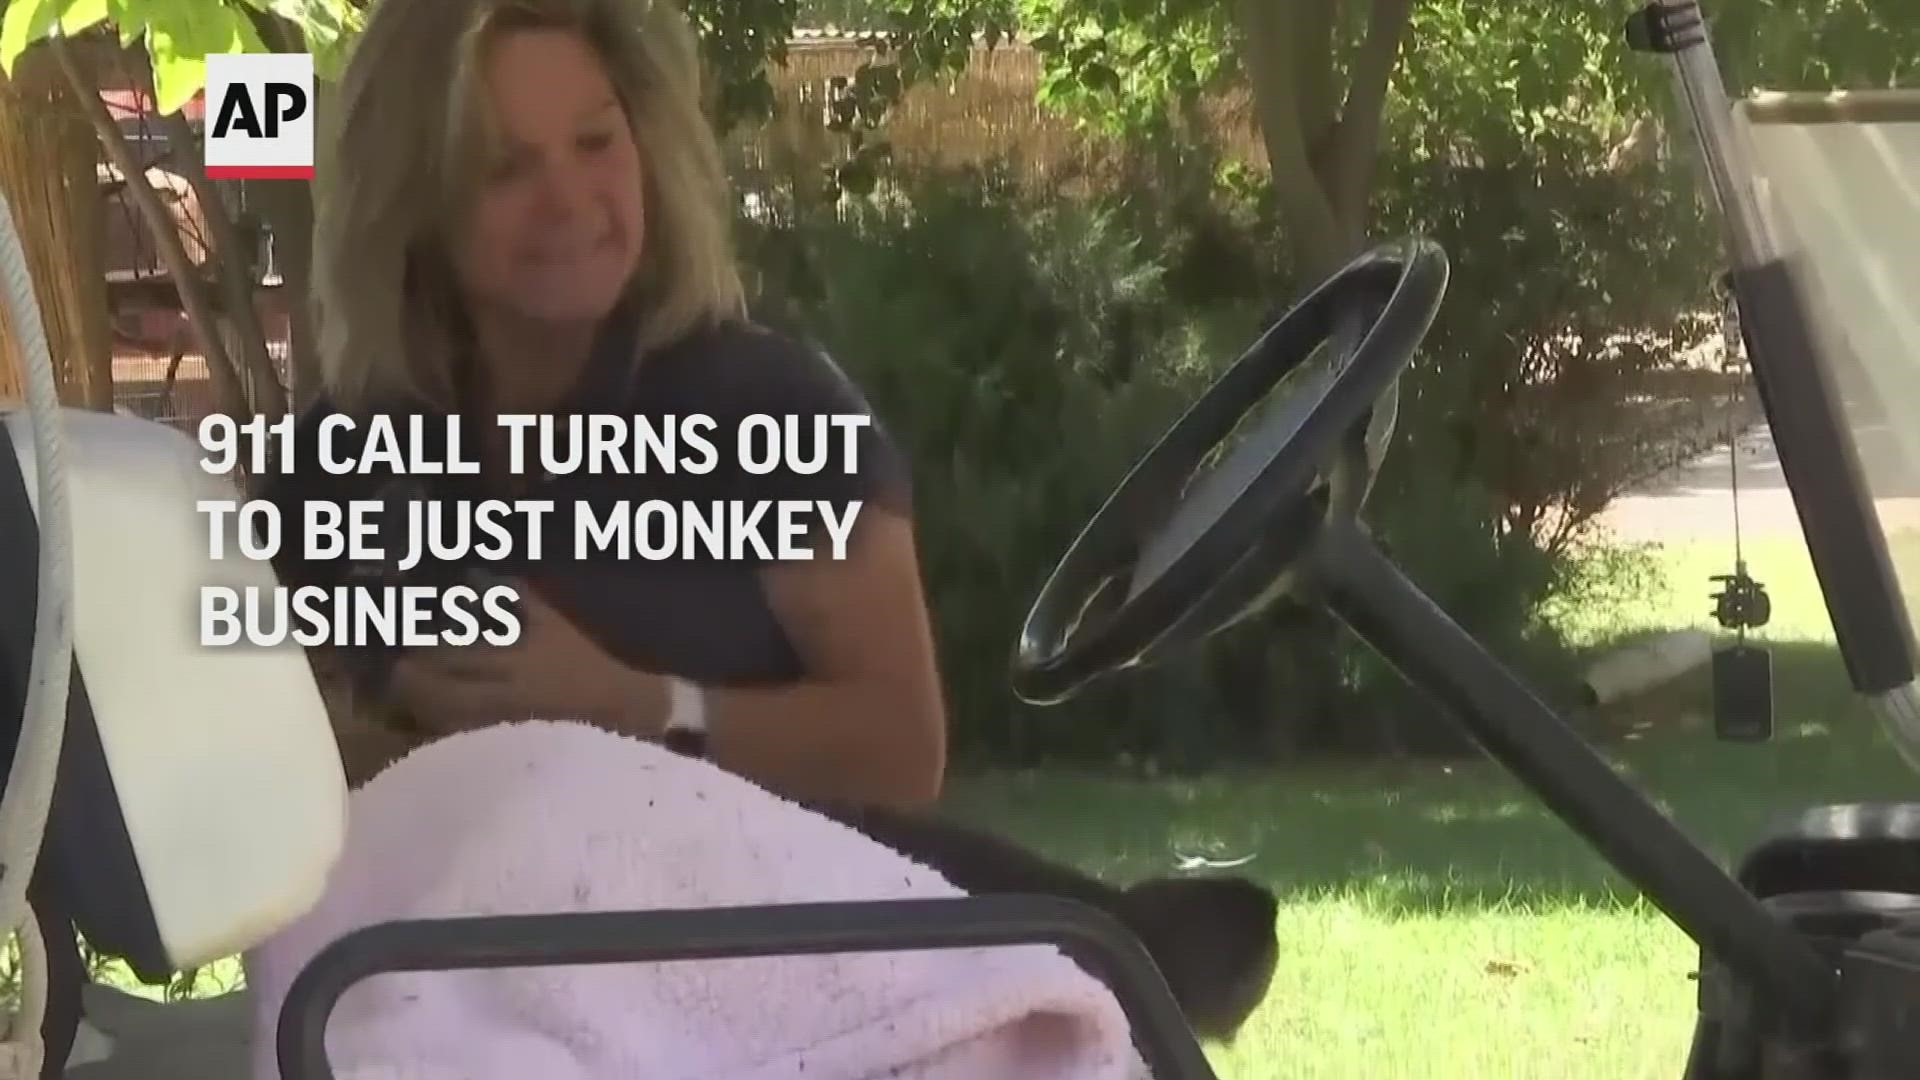 A Capuchin monkey named Route had apparently picked up a cell phone from a golf cart that had been left too close to him, and started dialing.